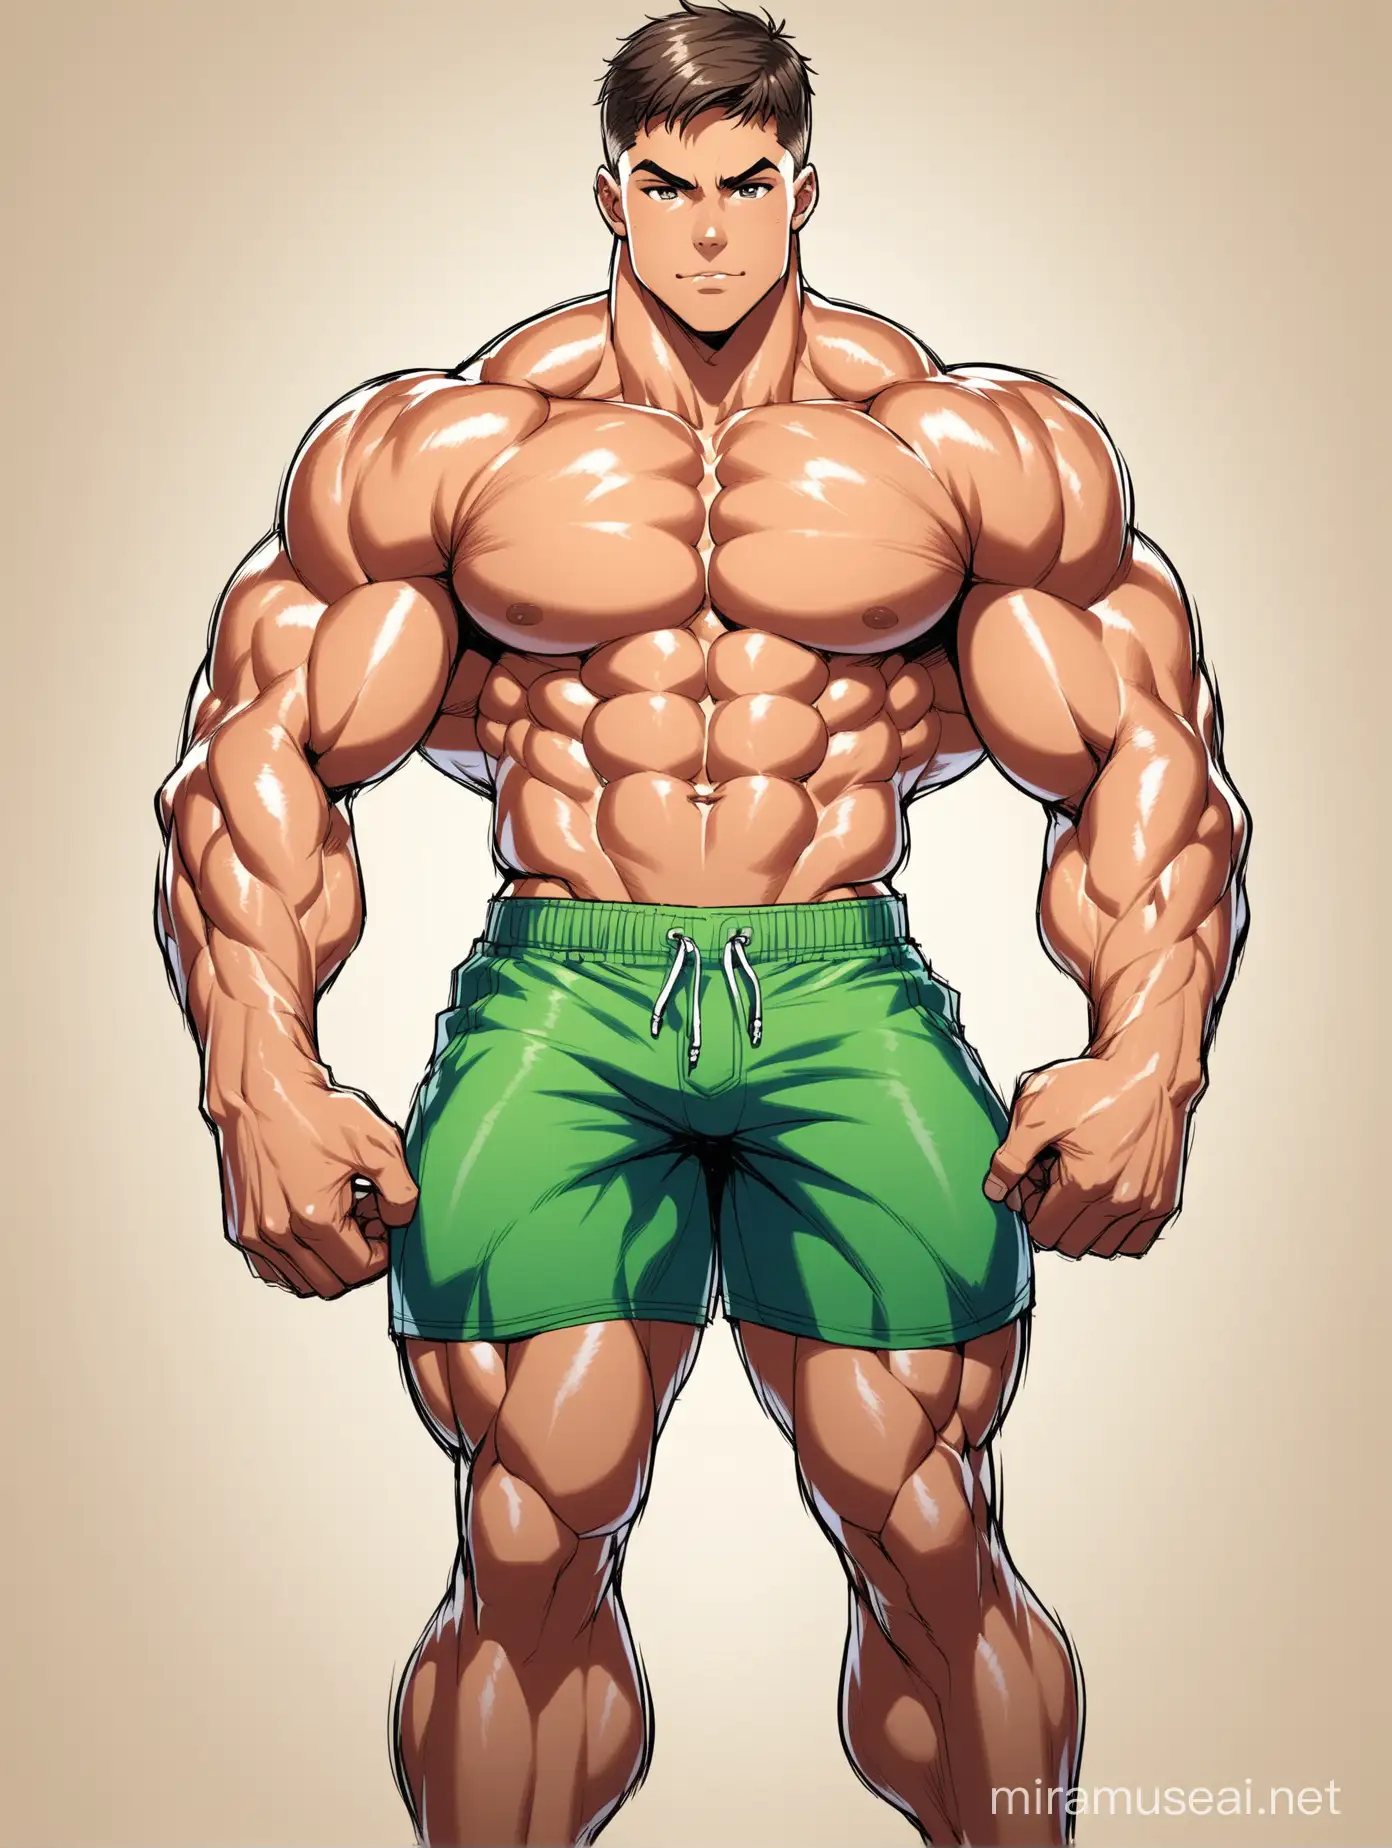 Full color drawing of an extremely muscular teenage male with a very beautiful, delicate face, wide shoulders, huge biceps, hard six-pack abs, and very strong and powerful legs, wearing shorts or trunks